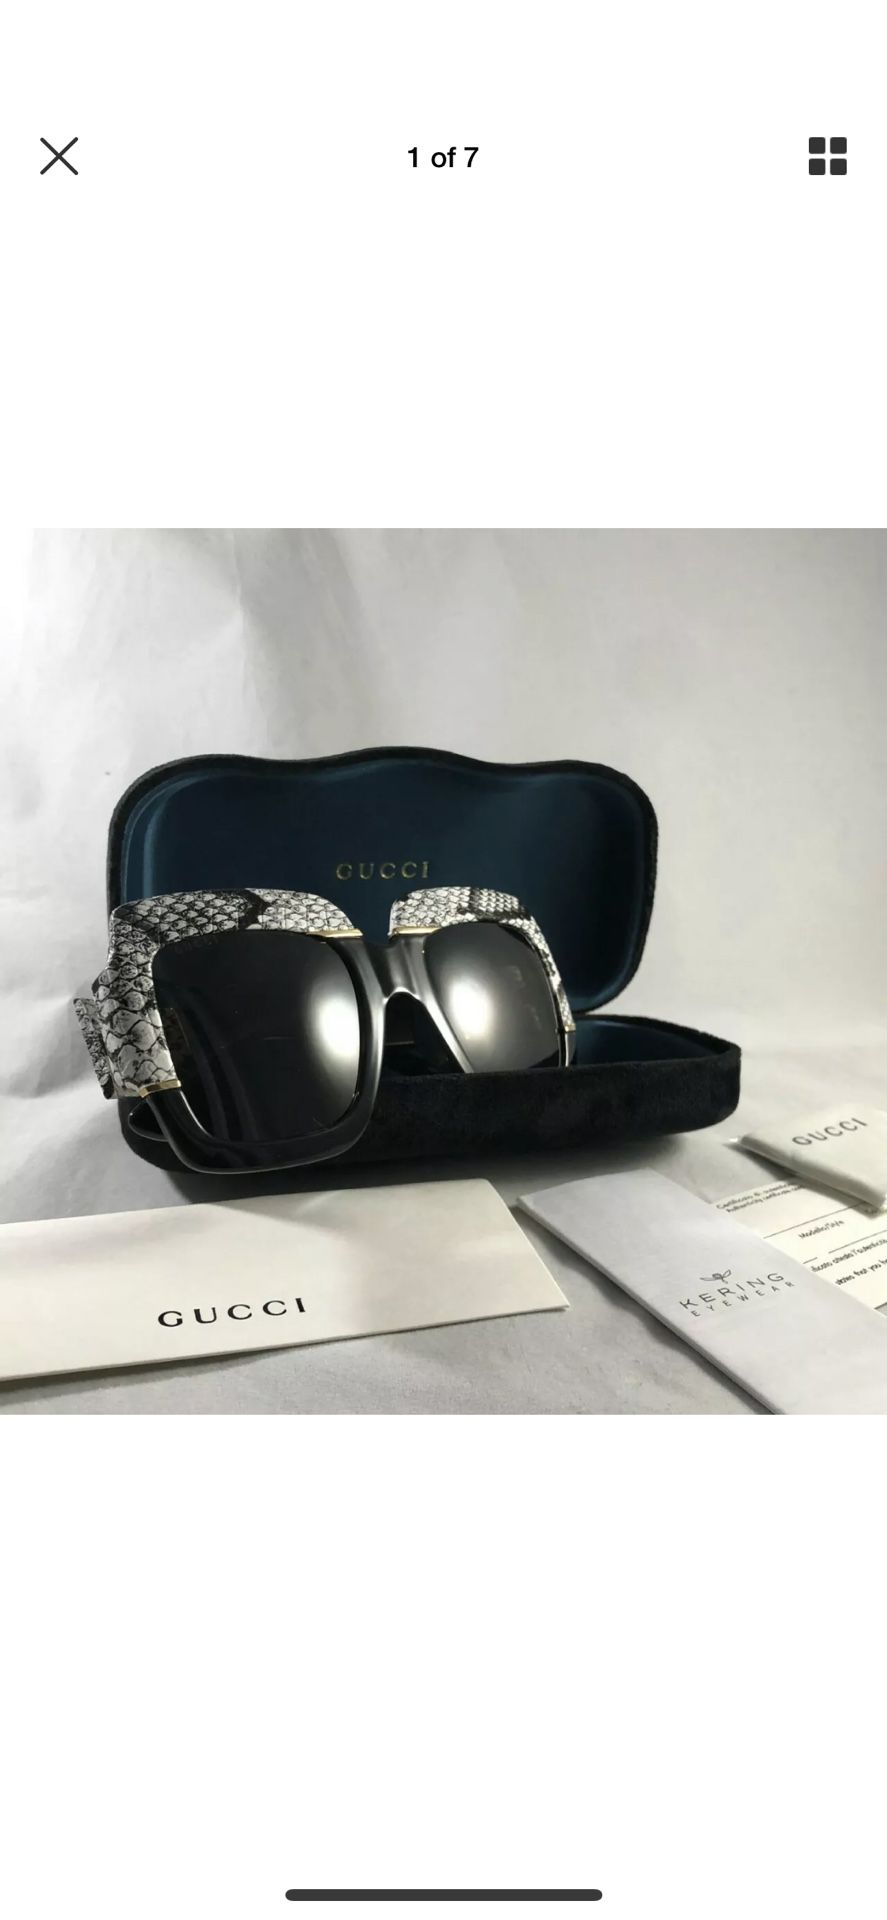 Authentic Gucci sunglasses very stunning 🕶